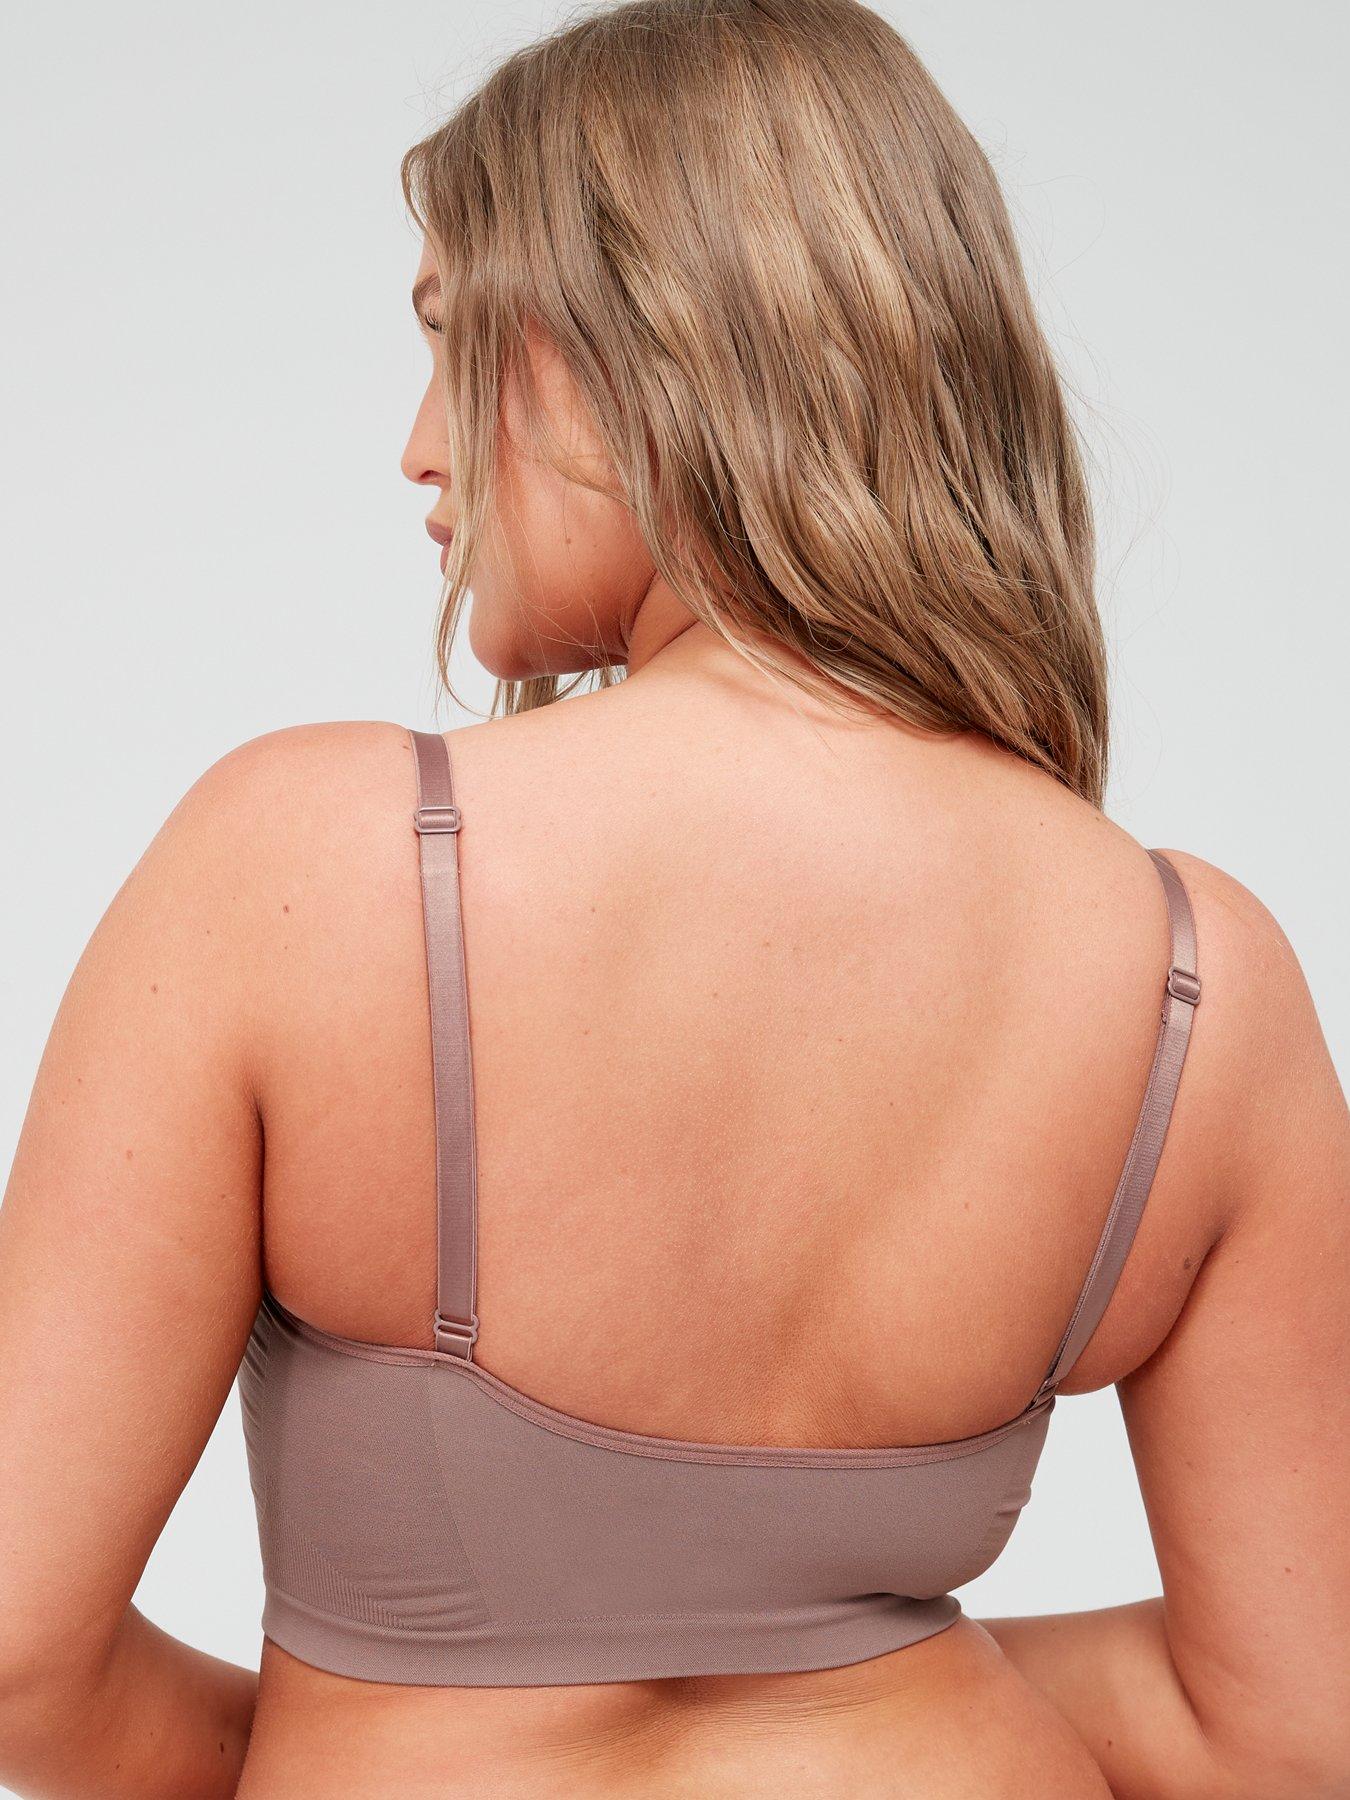 True & Co Taupe Seamless Adjustable Strap Bra Small Gray - $33 - From Sunny